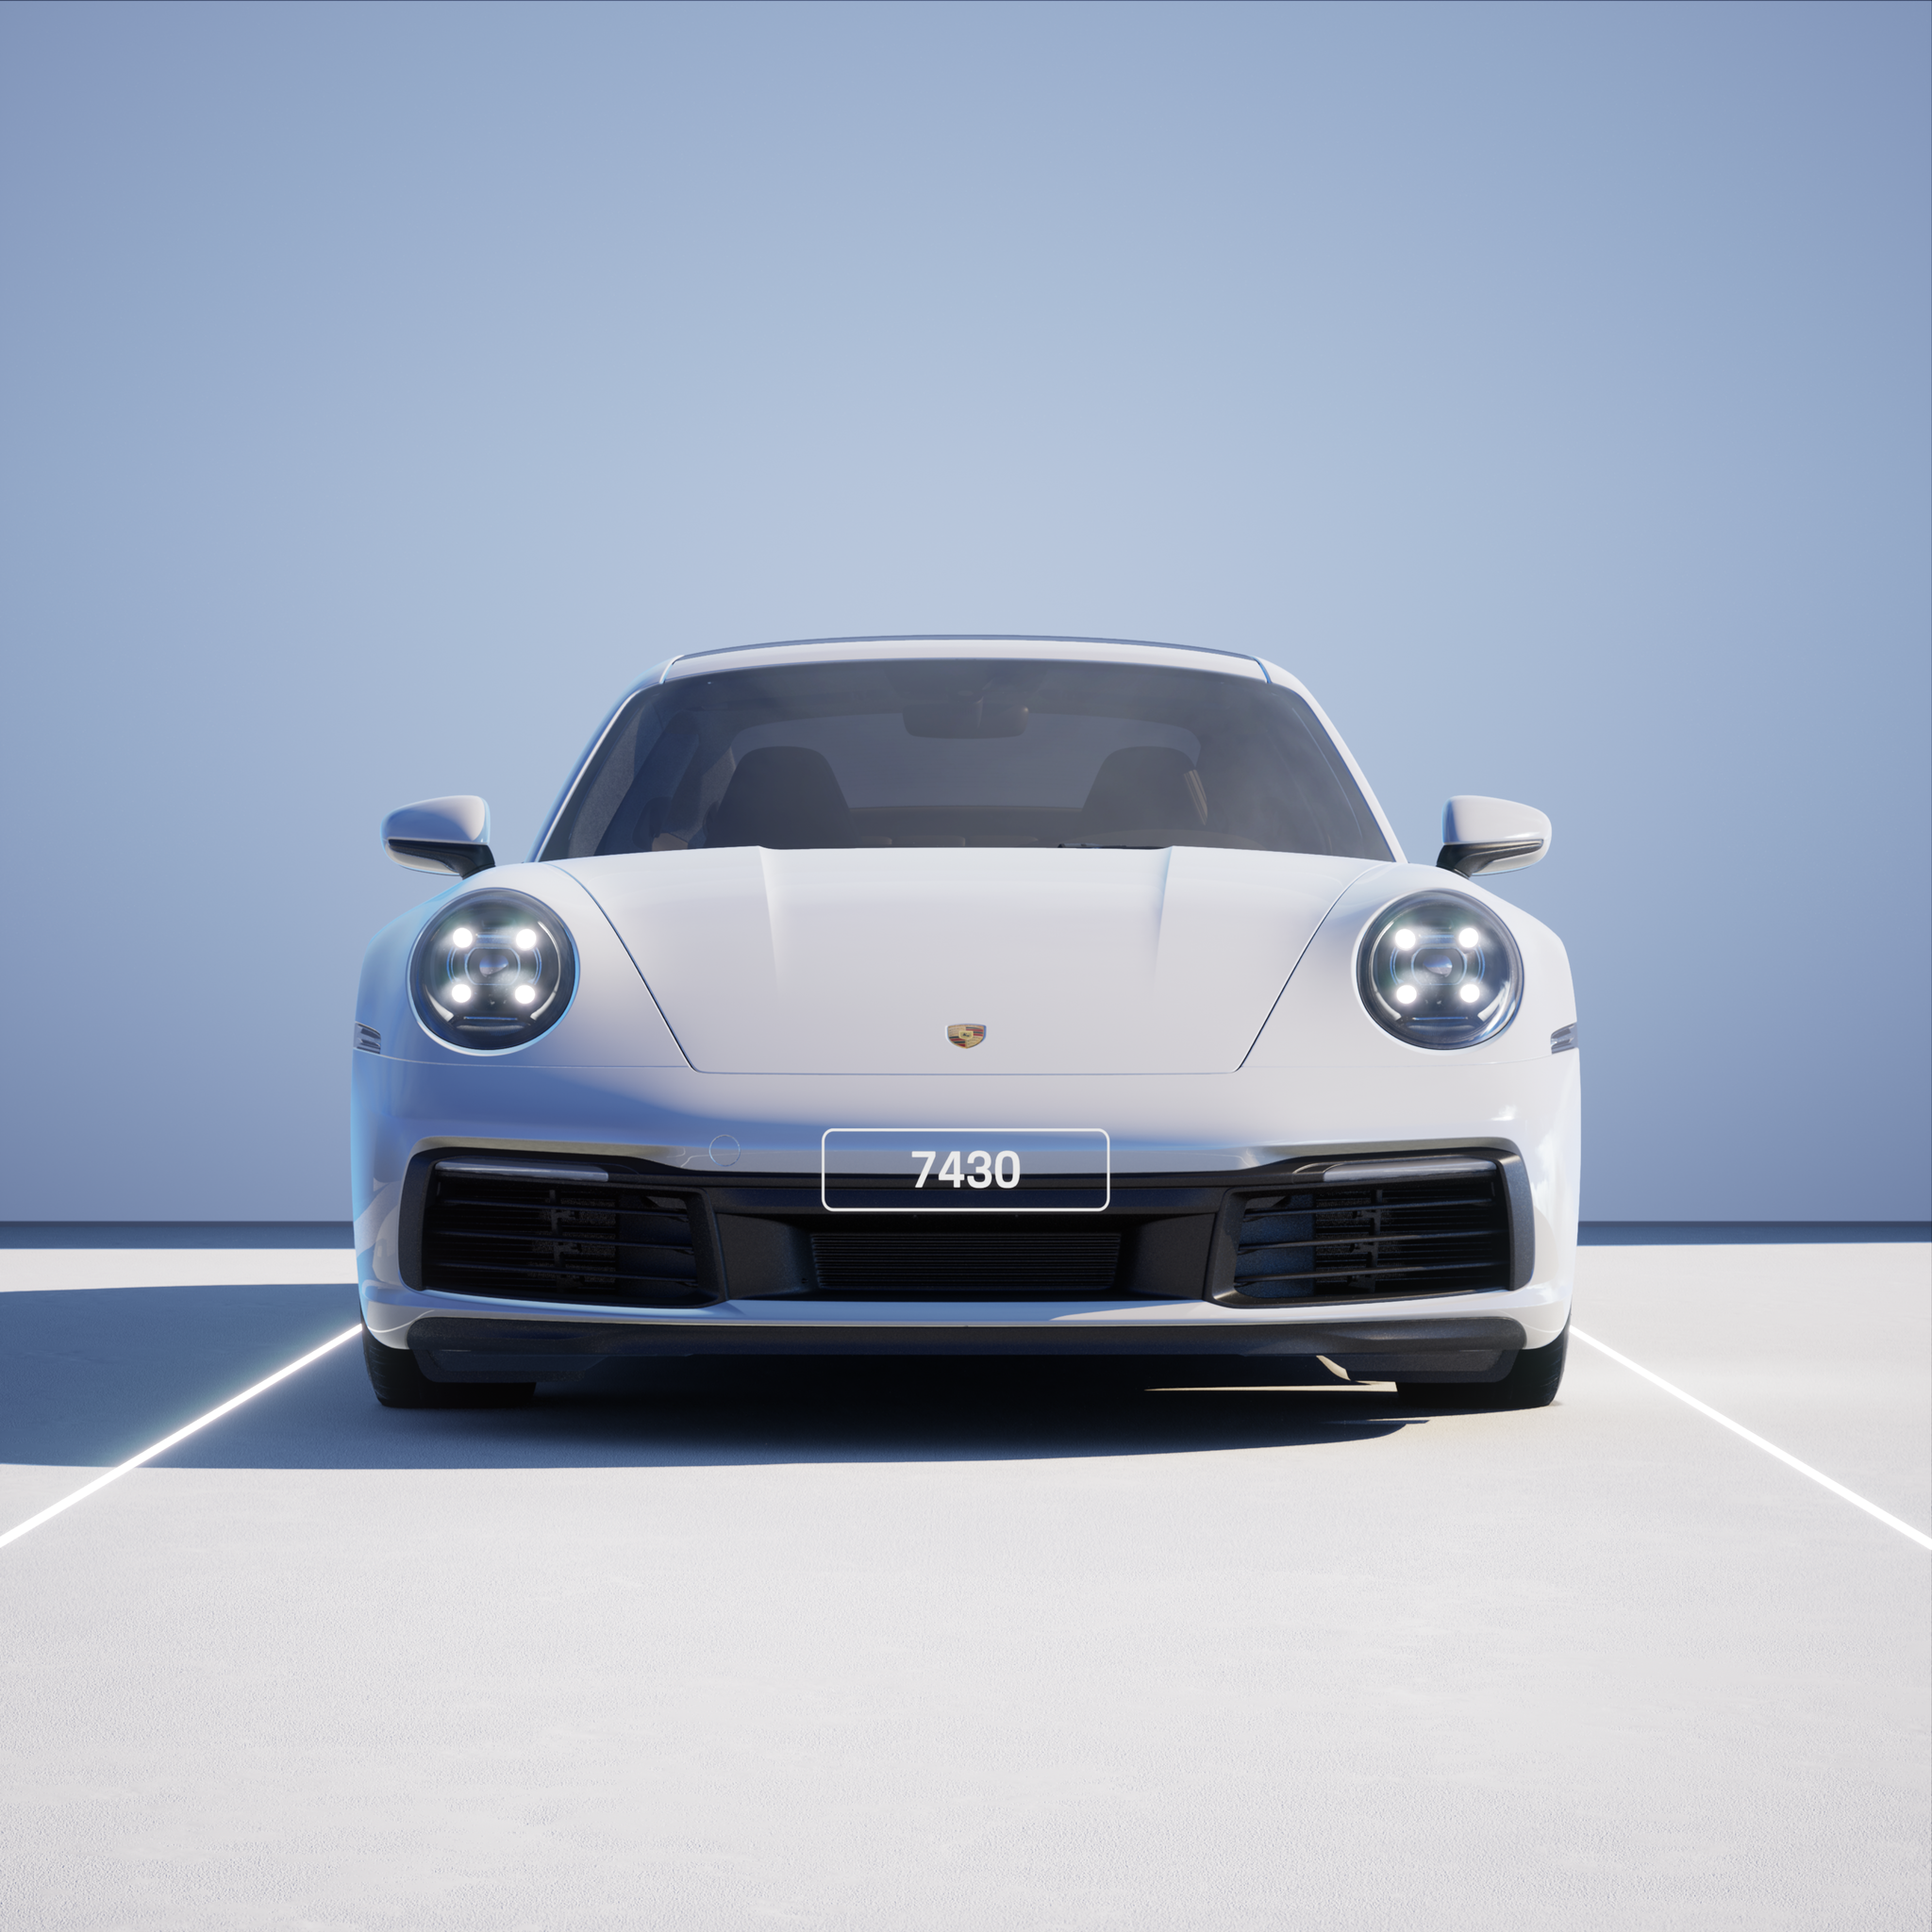 The PORSCHΞ 911 7430 image in phase